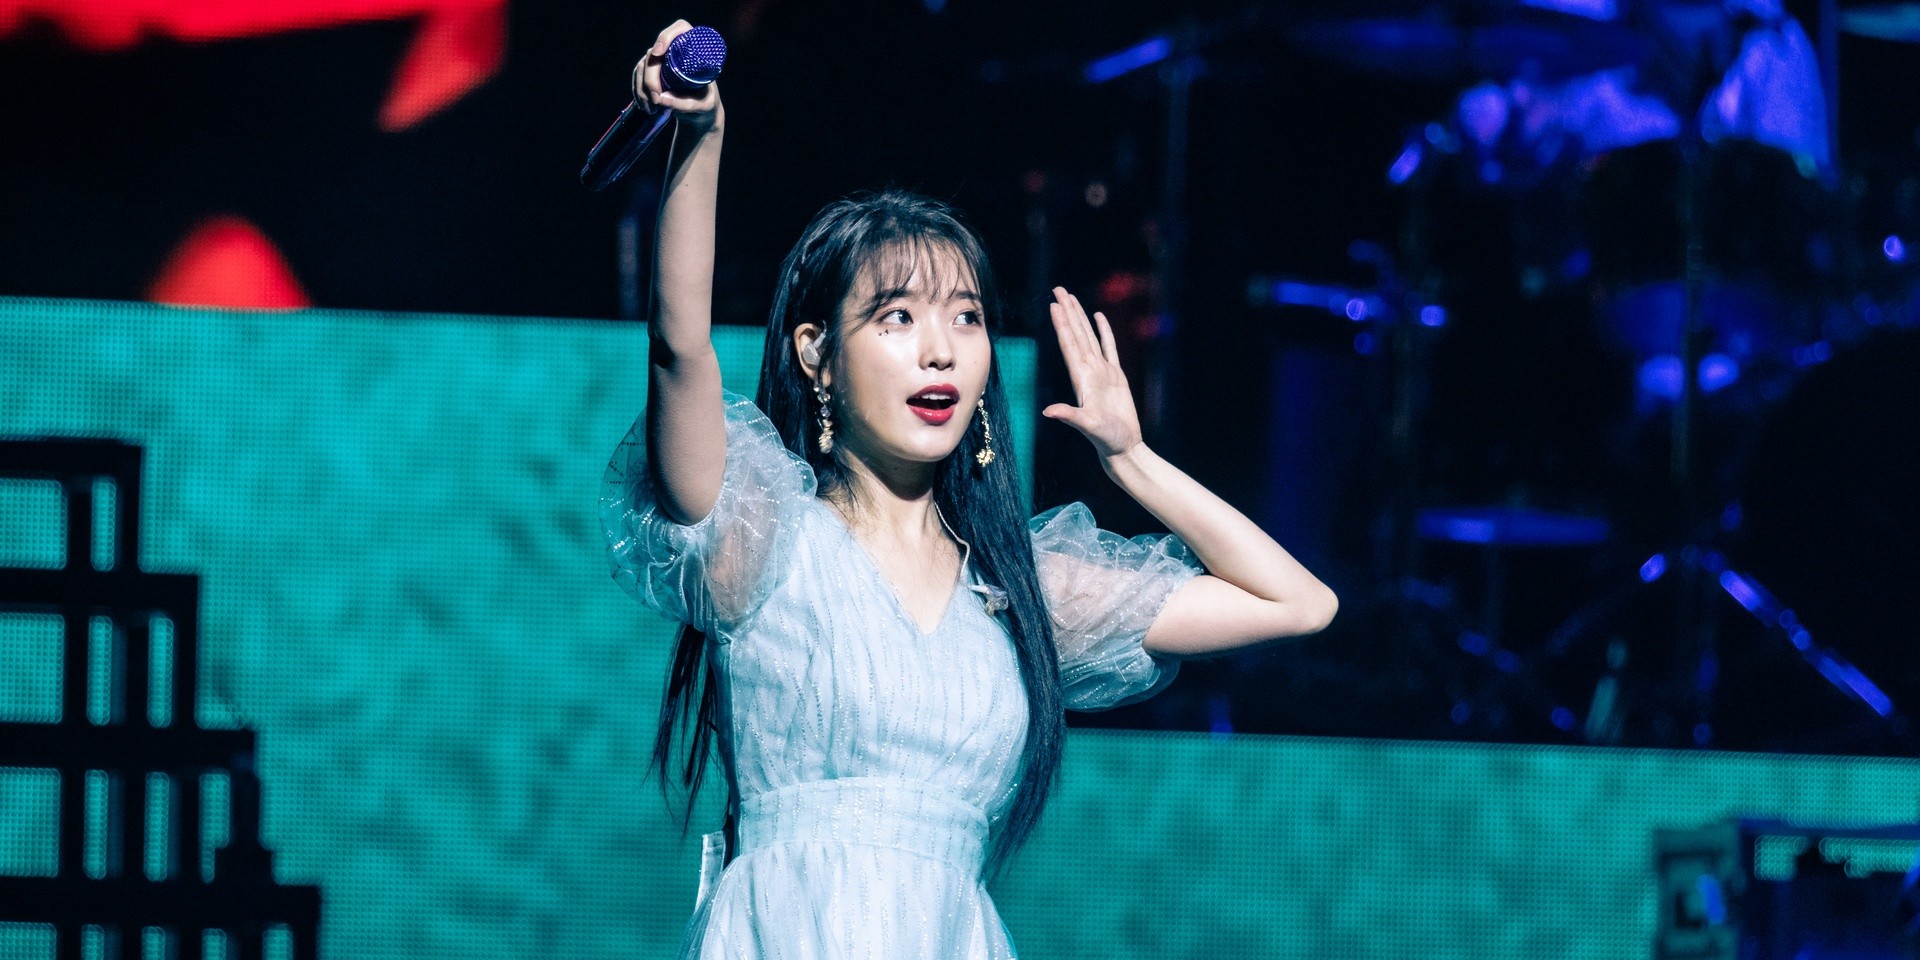 IU displays a special connection with fans at Singapore show – gig report